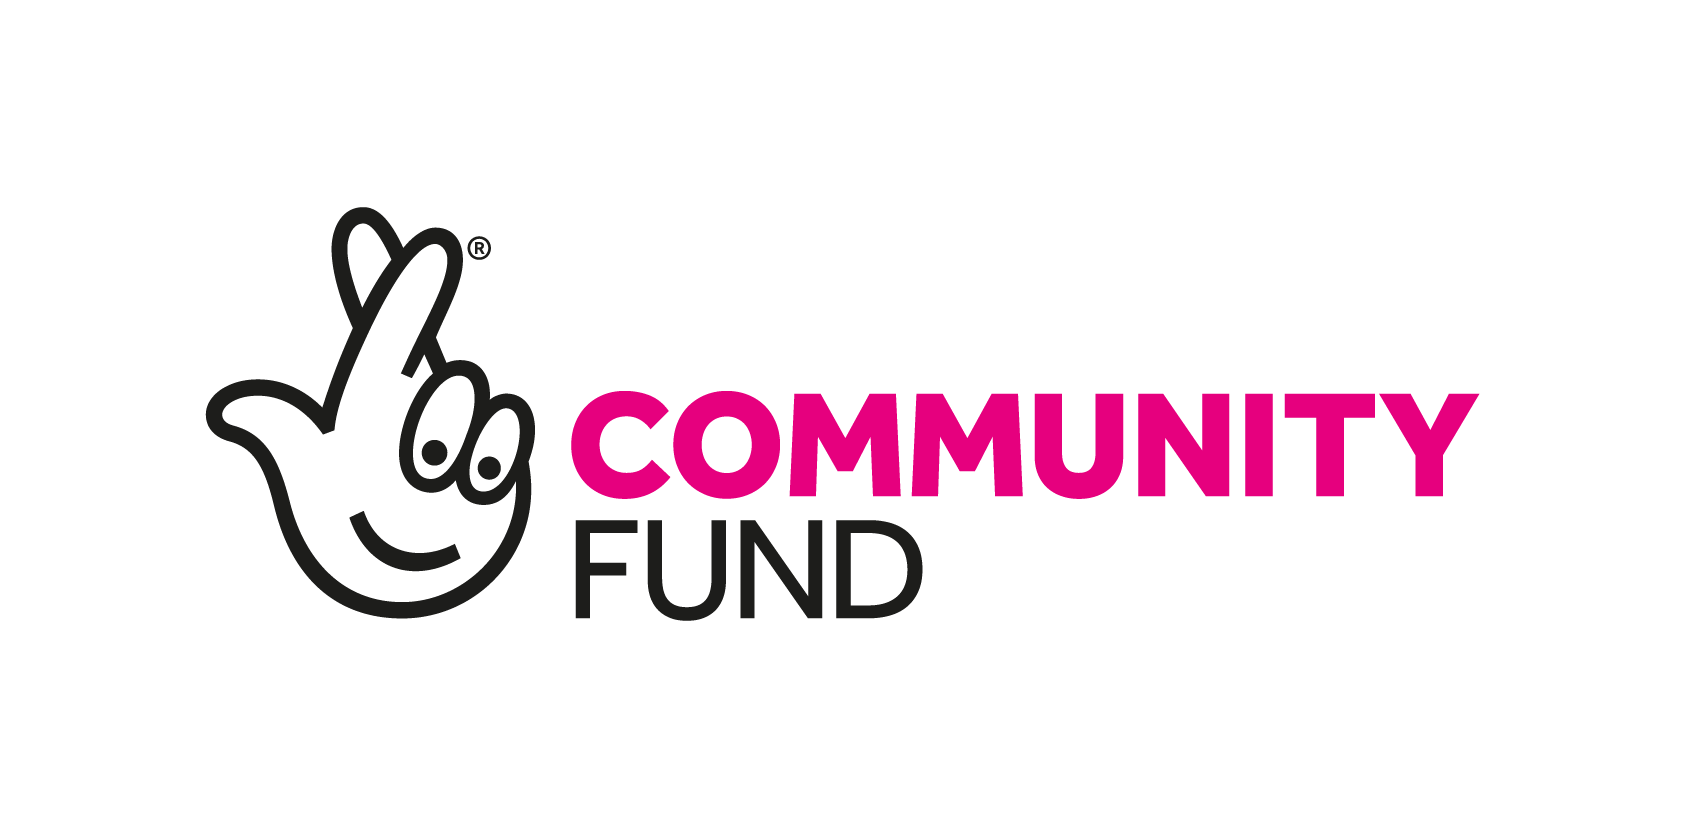 The fingers crossed logo of the National Lottery Community Fund